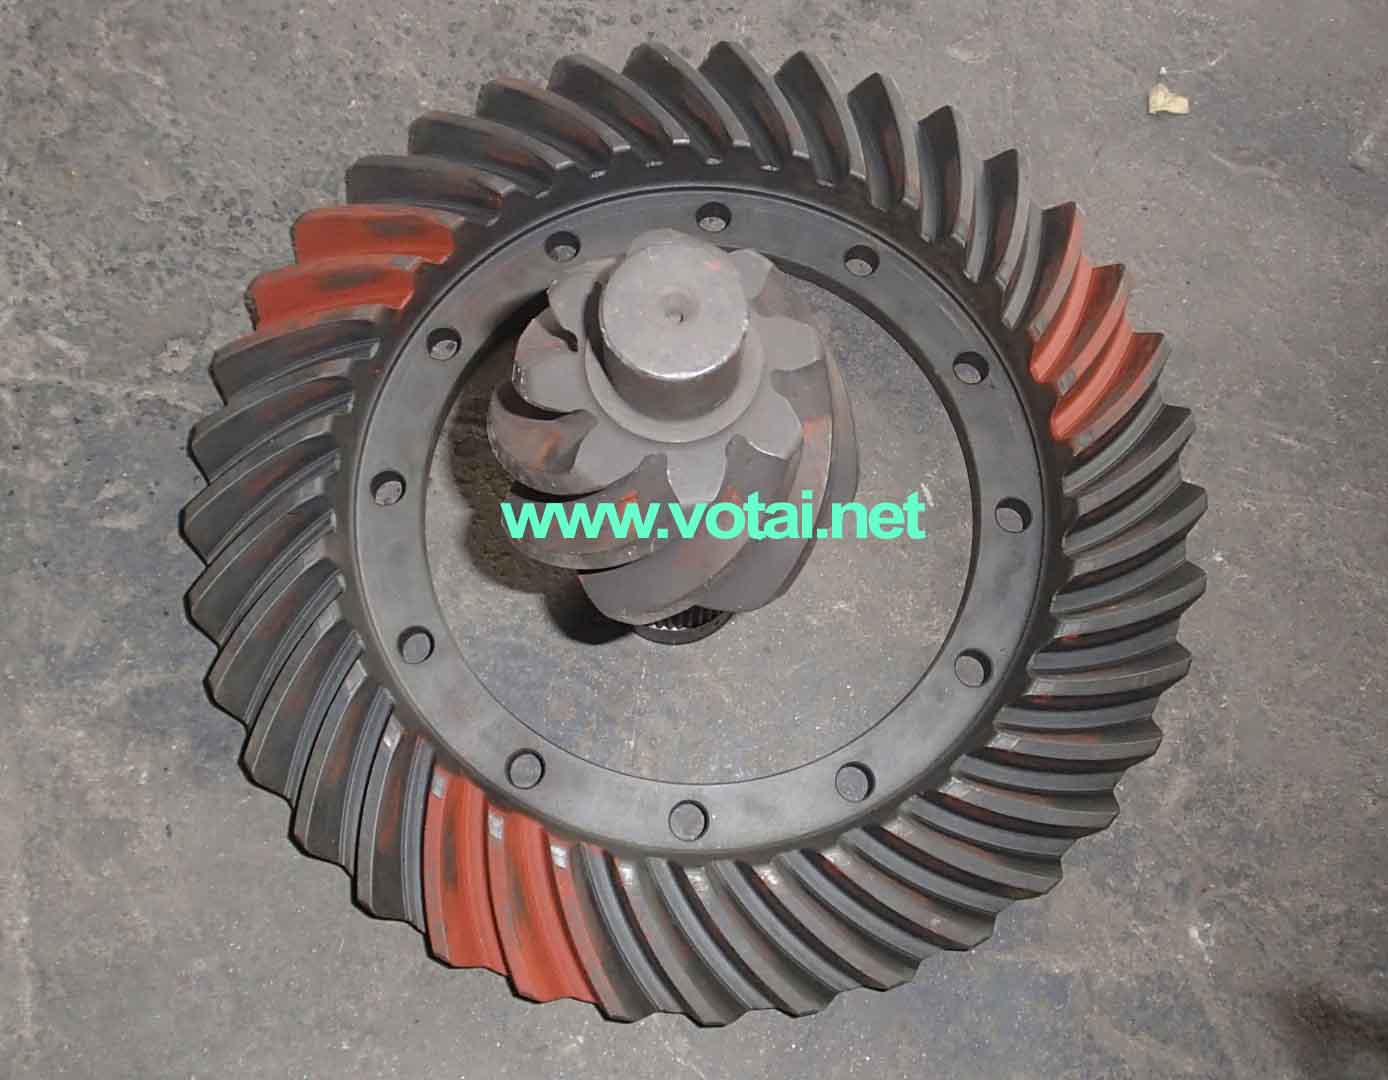 Tianjin Votai - Changlin Wheel Loader Spare parts supplier, Changlin ZL30H, ZL50H, ZL50G, ZL60H, ZL968 and ZL958 spare parts